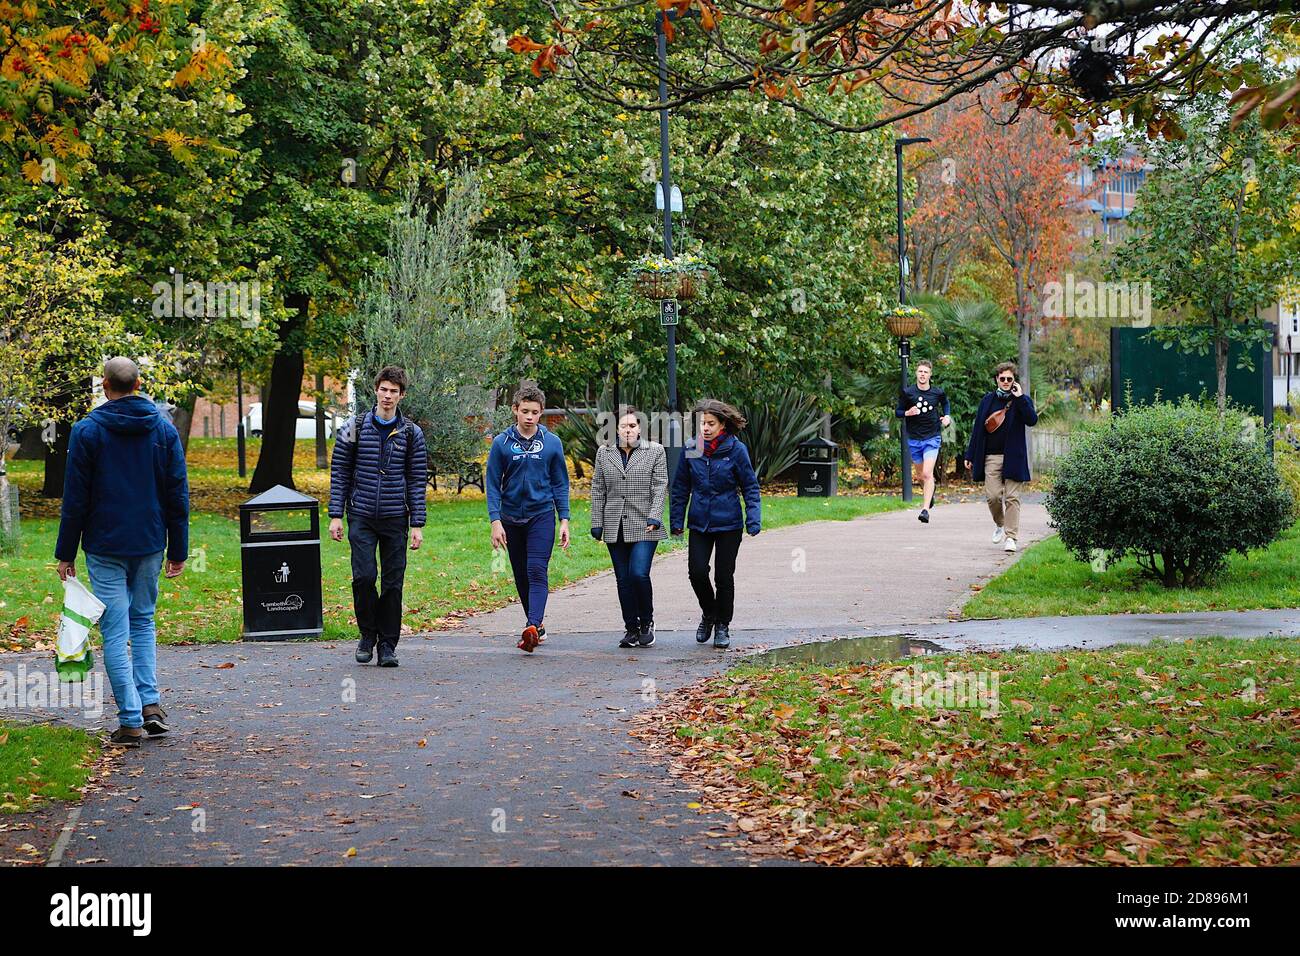 Vauxhall, London, UK. 28 Oct, 2020. UK Weather: Chilly but sunny with cloudy intervals and blustery winds. People enjoying the sunshine walking or running at the Vauxhall pleasure gardens. Photo Credit: Paul Lawrenson-PAL Media/Alamy Live News Stock Photo